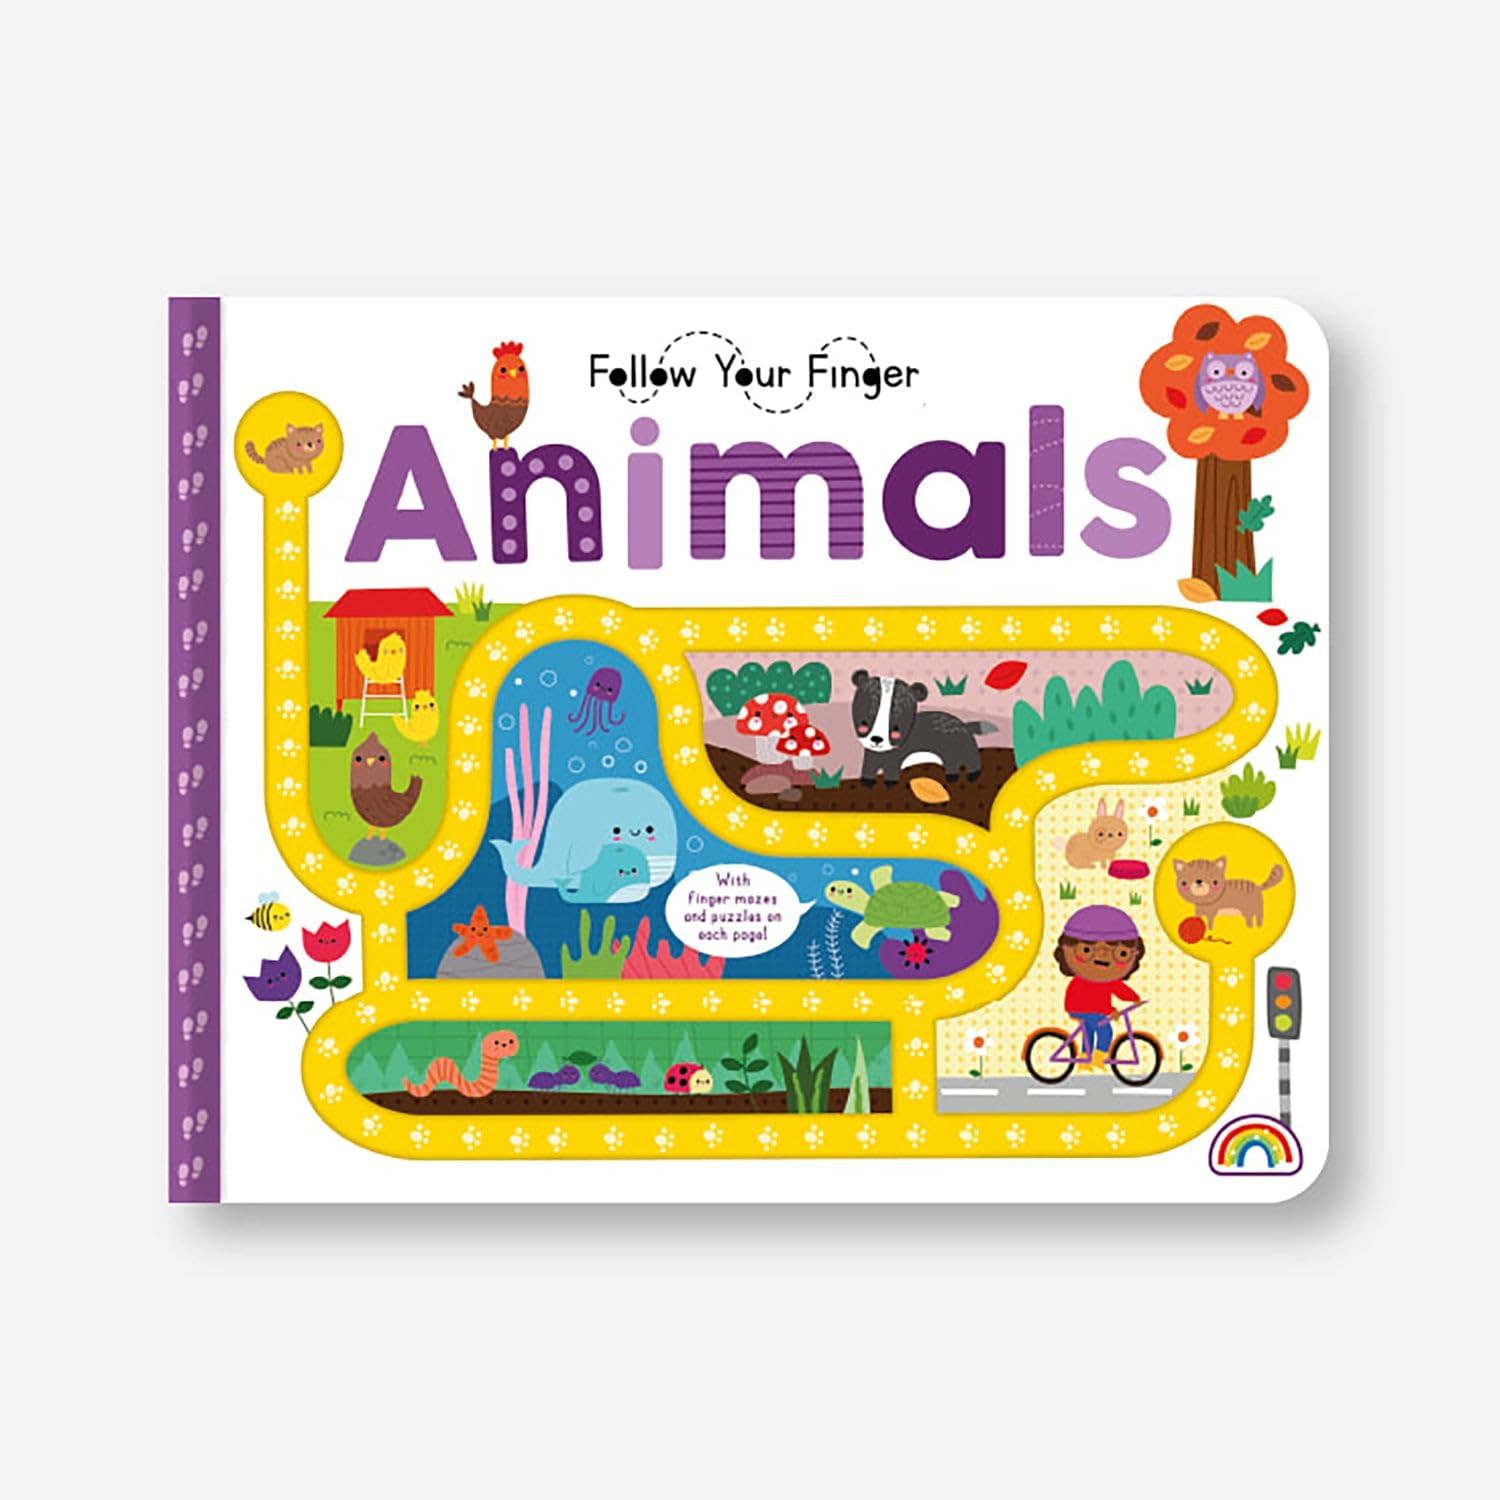 Follow Your Finger Board Book - Animals